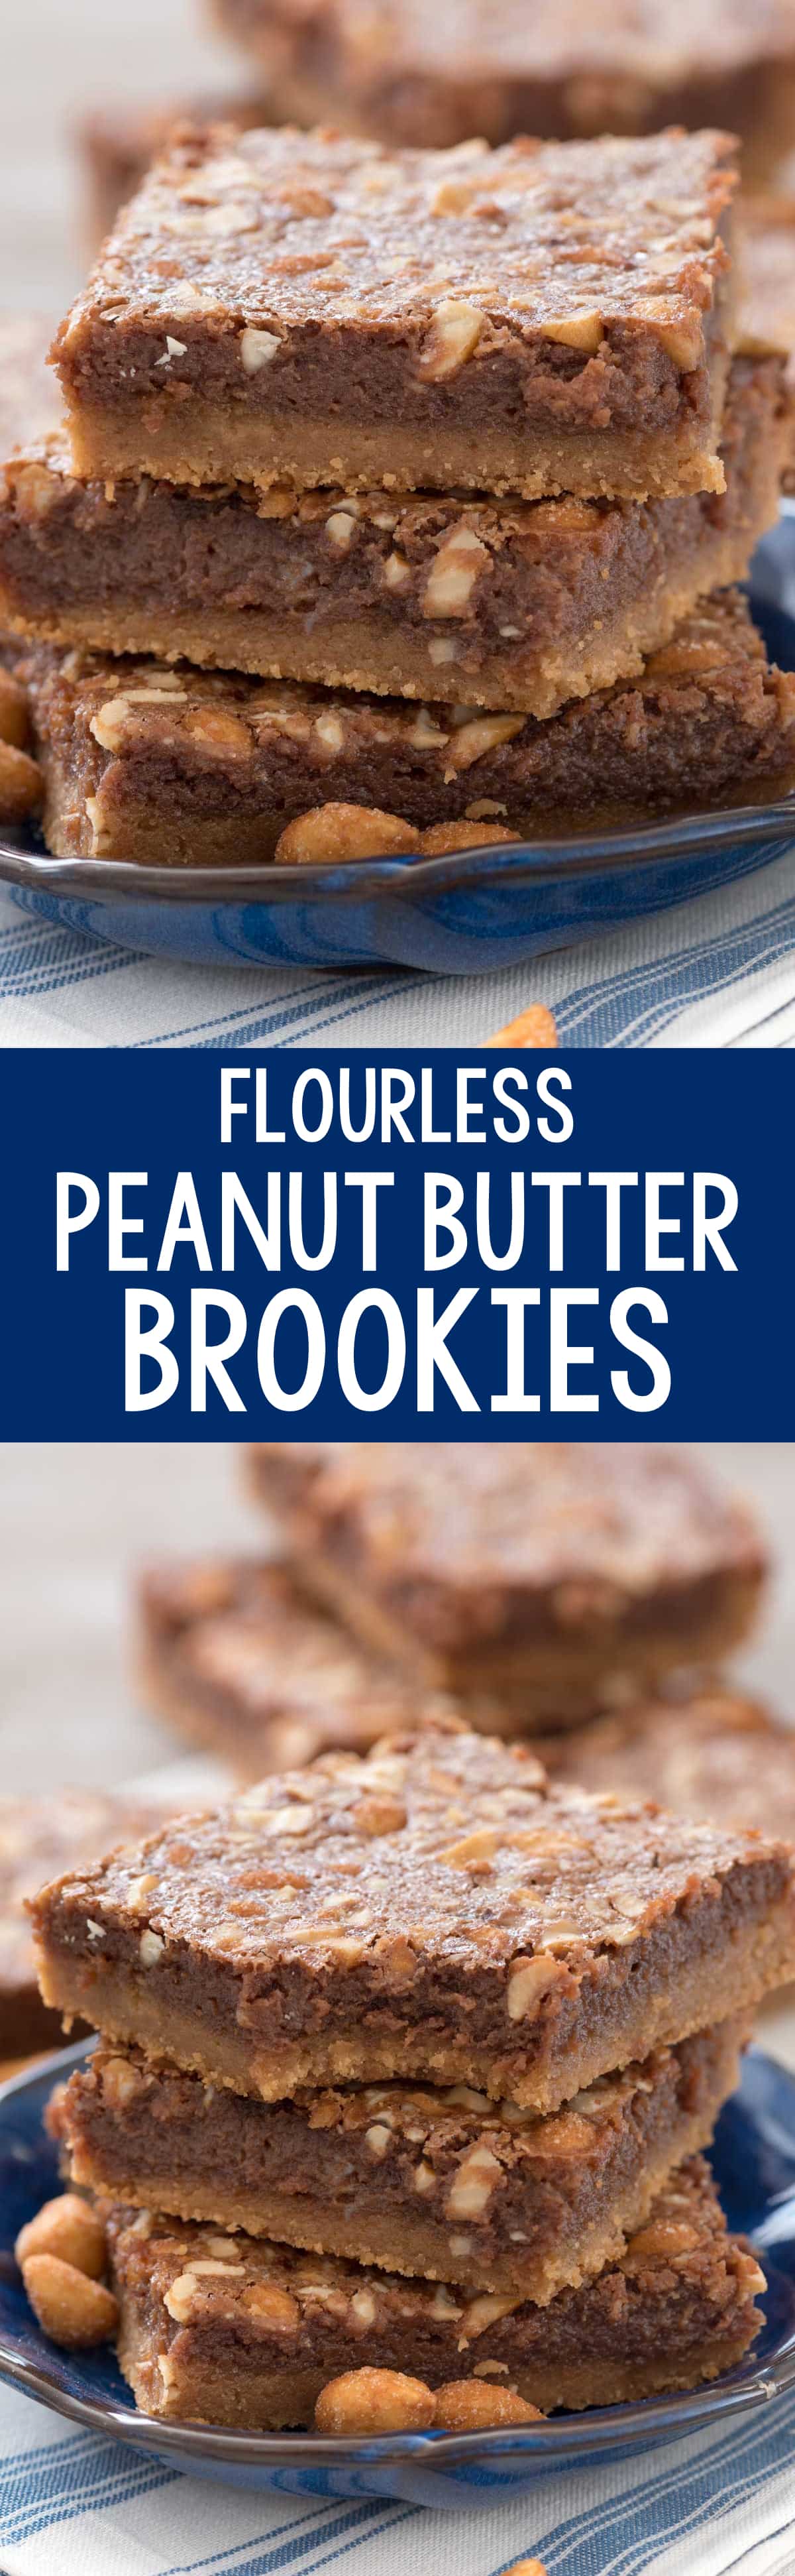 Flourless Peanut Butter Brookies - these chocolate fudge peanut butter cookie bars are accidentally gluten-free and taste like brownie peanut butter cookies!